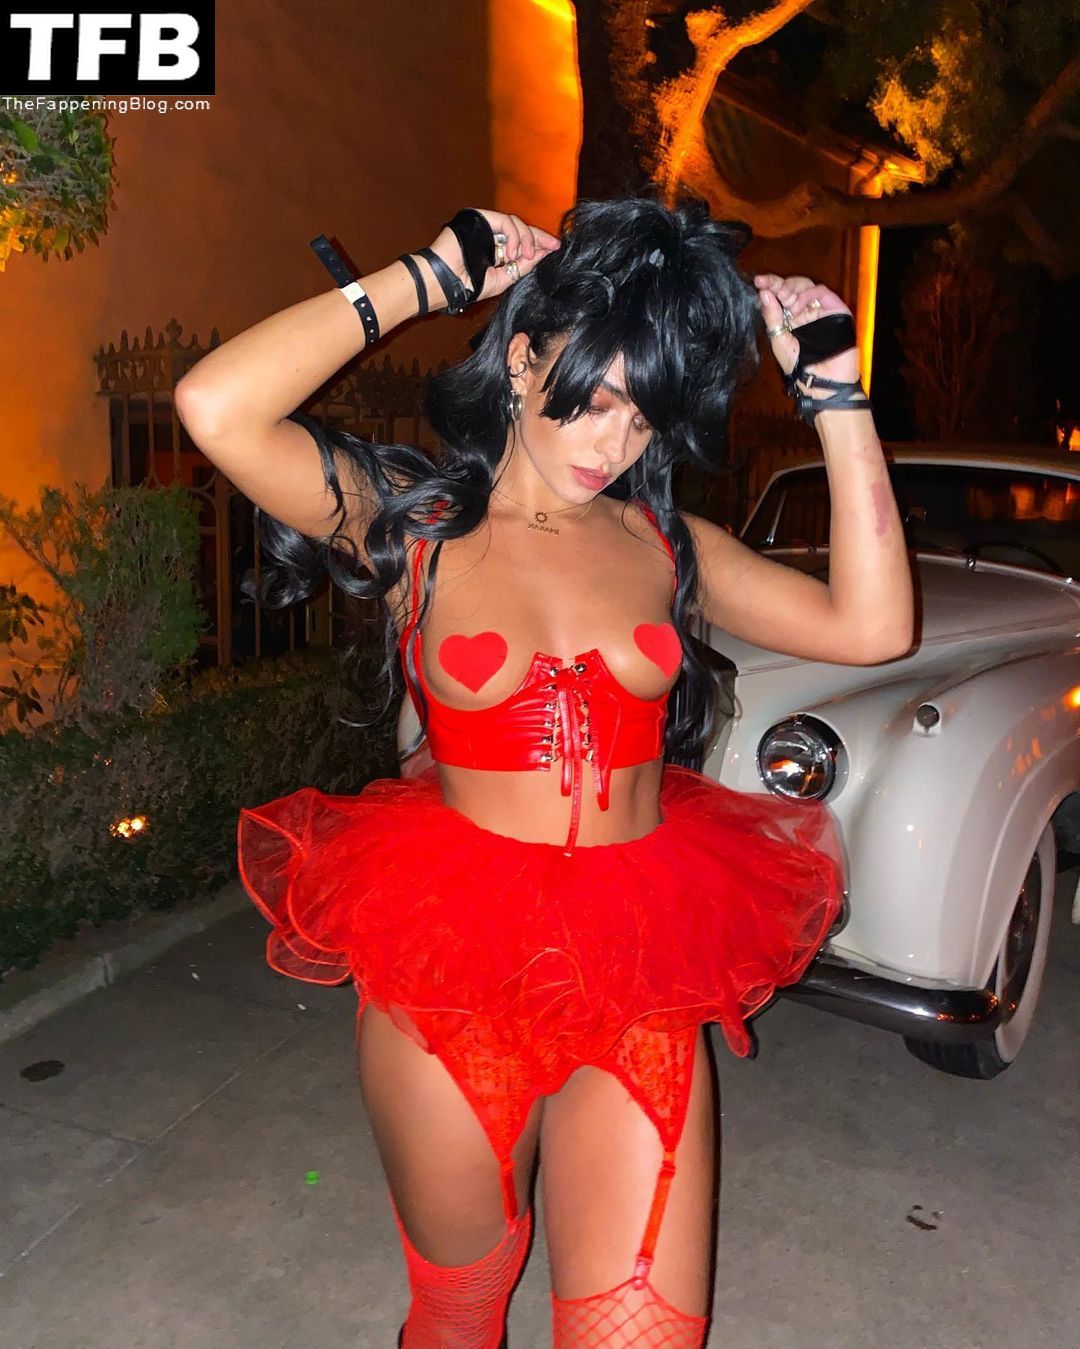 Sommer Ray Flaunts Her Small Tits on Halloween (7 Photos)